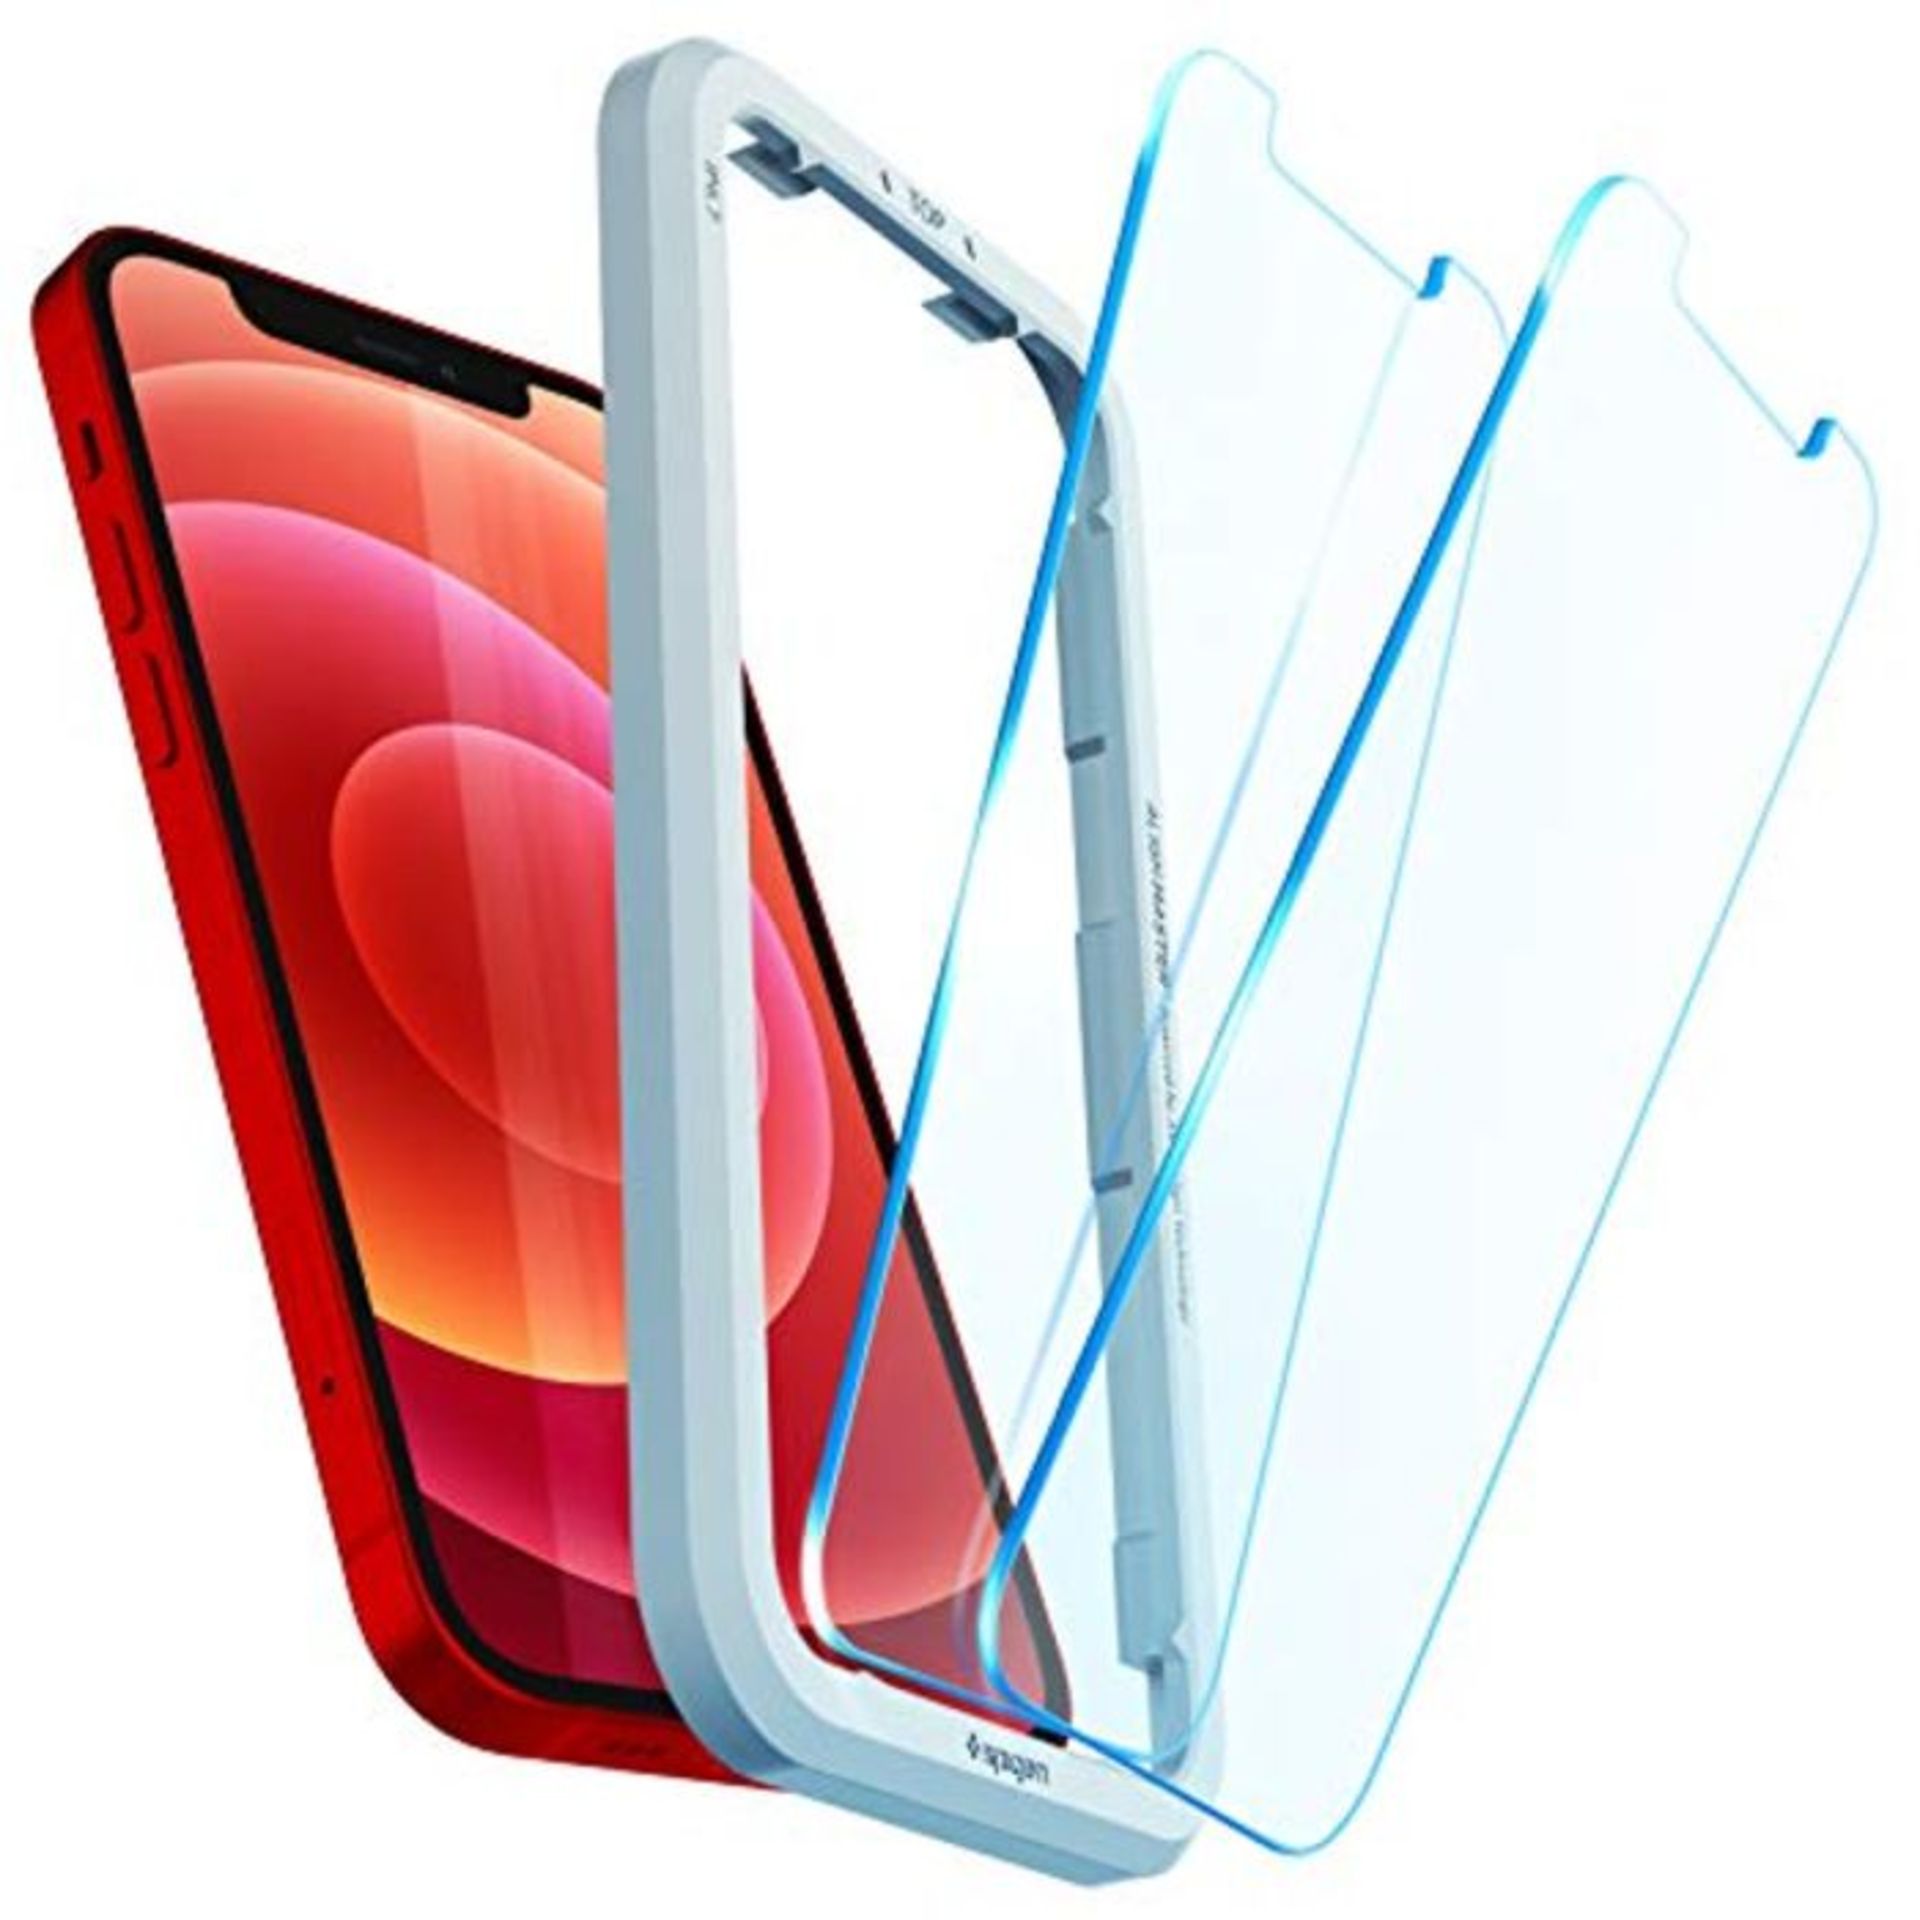 Spigen AlignMaster Tempered Glass Screen Protector for iPhone 12 and for iPhone 12 Pro